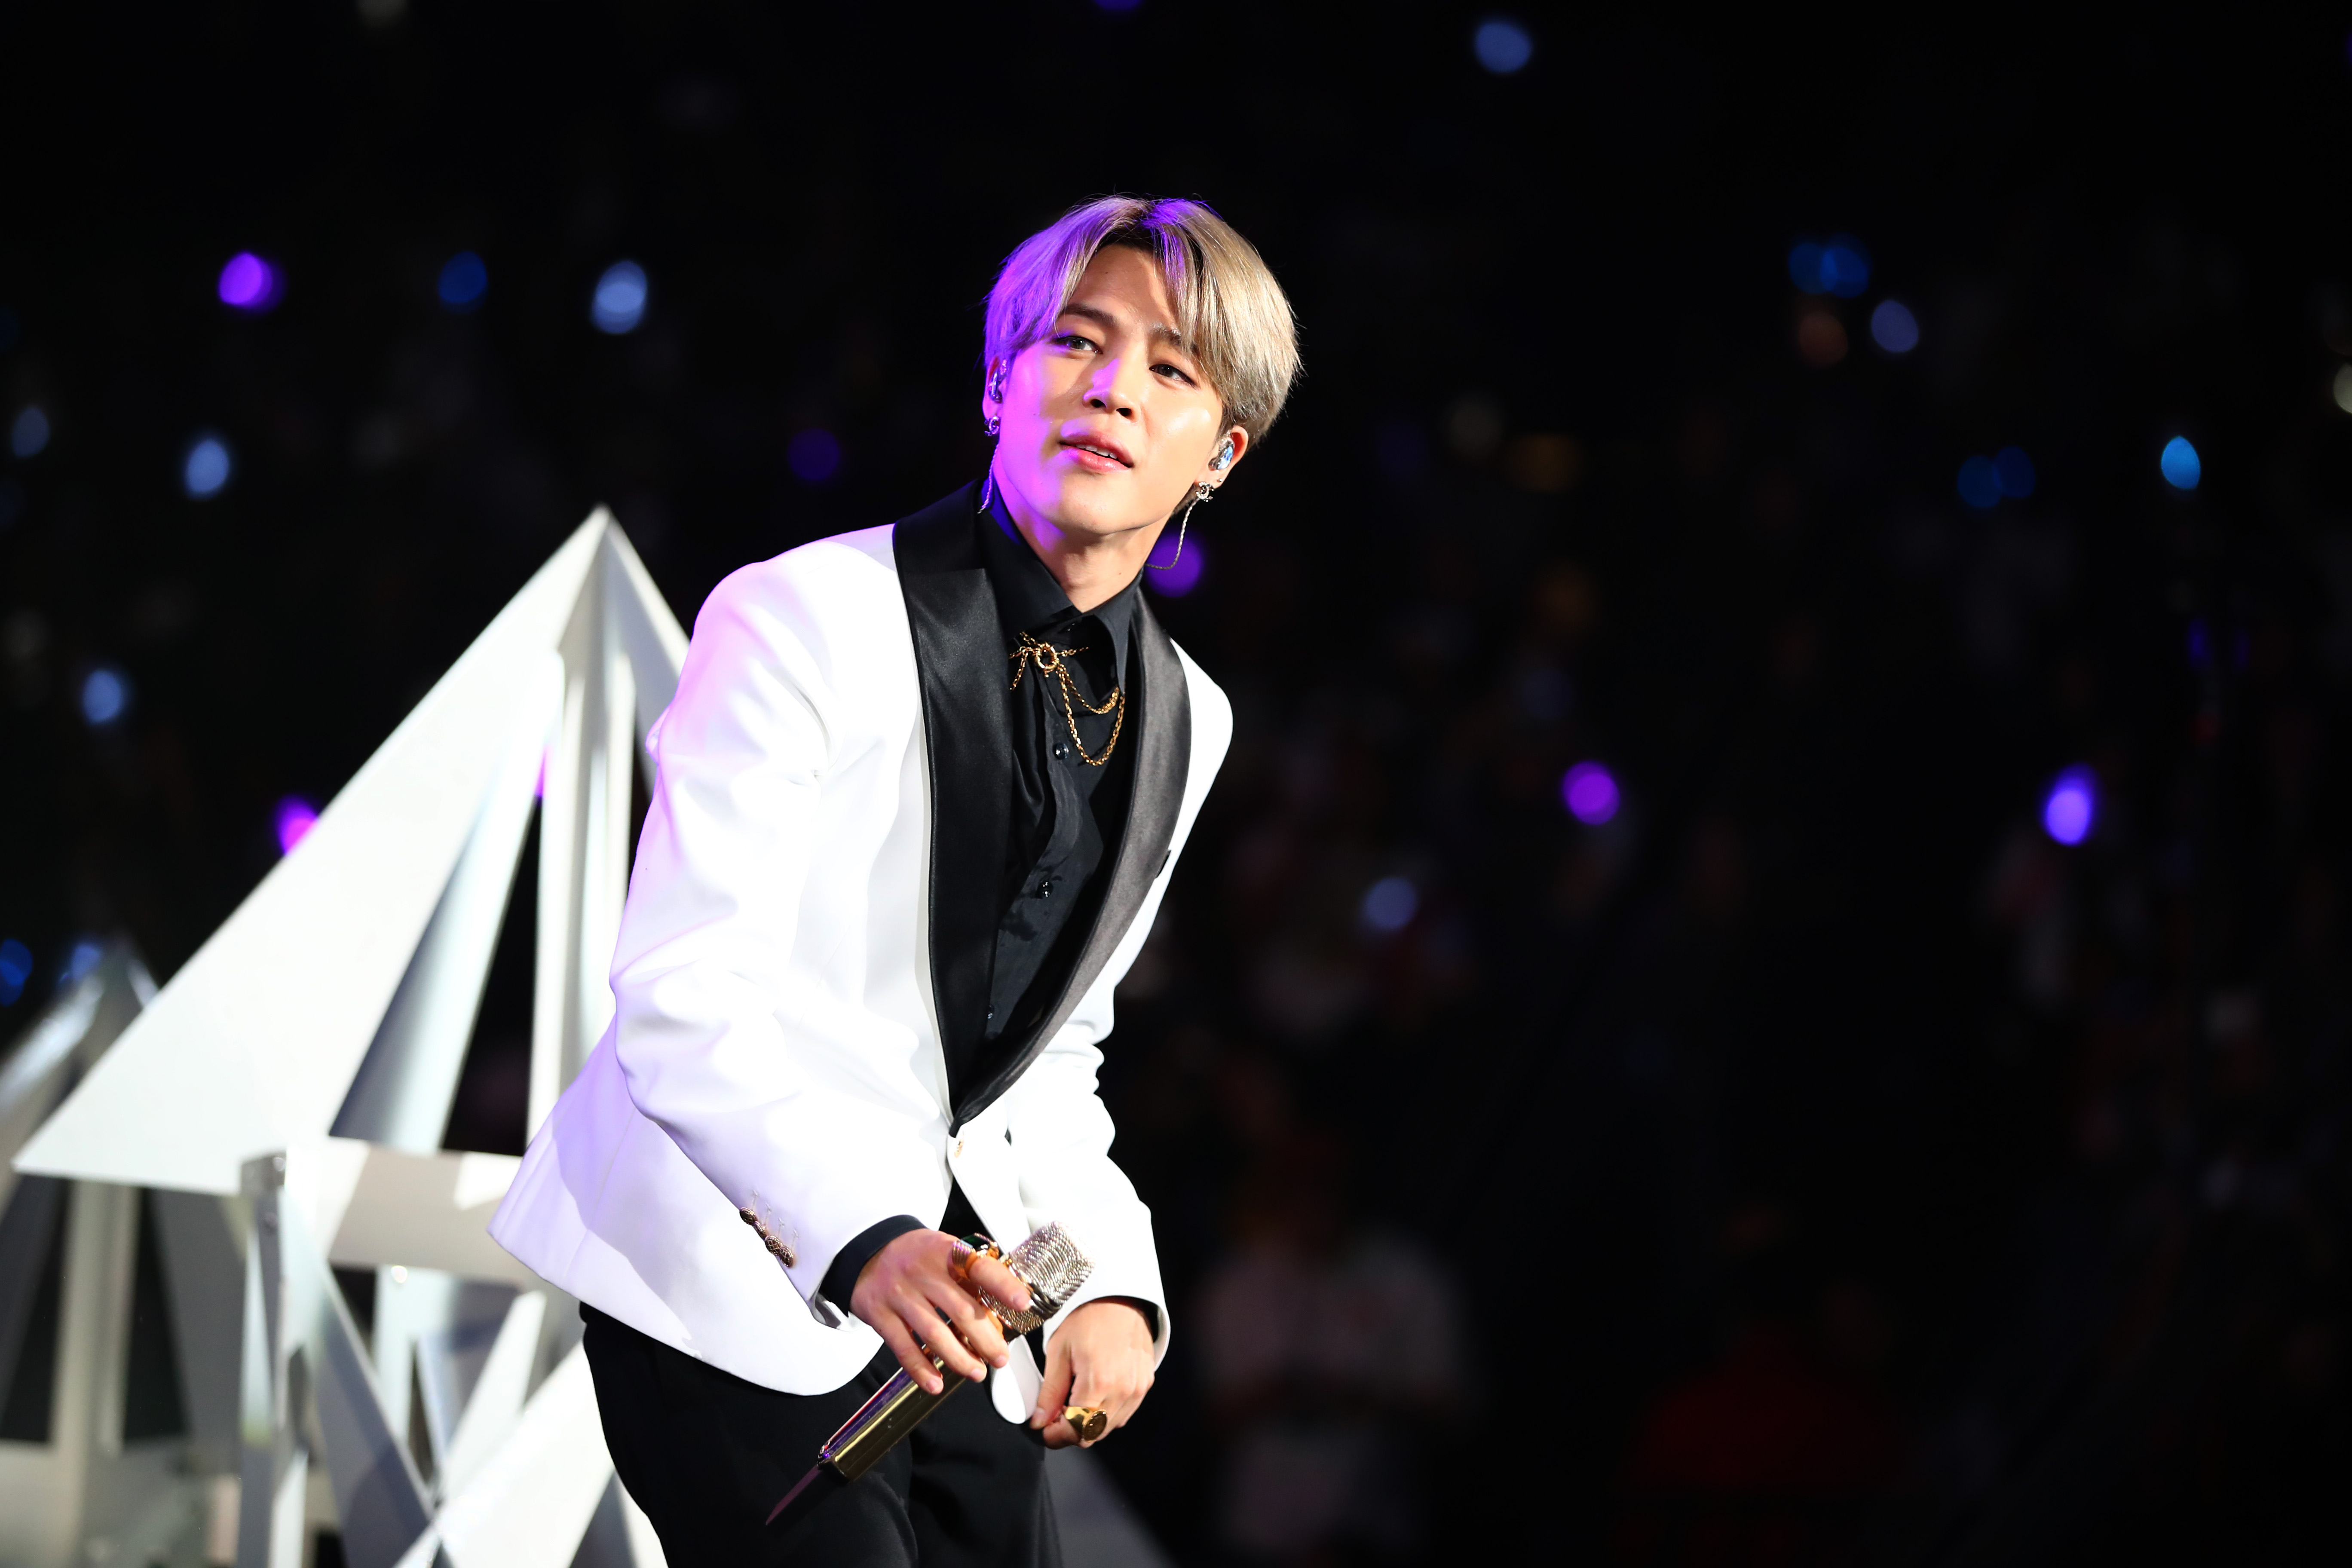 Jimin of BTS wears a white suit onstage at 102.7 KIIS FM's Jingle Ball 2019